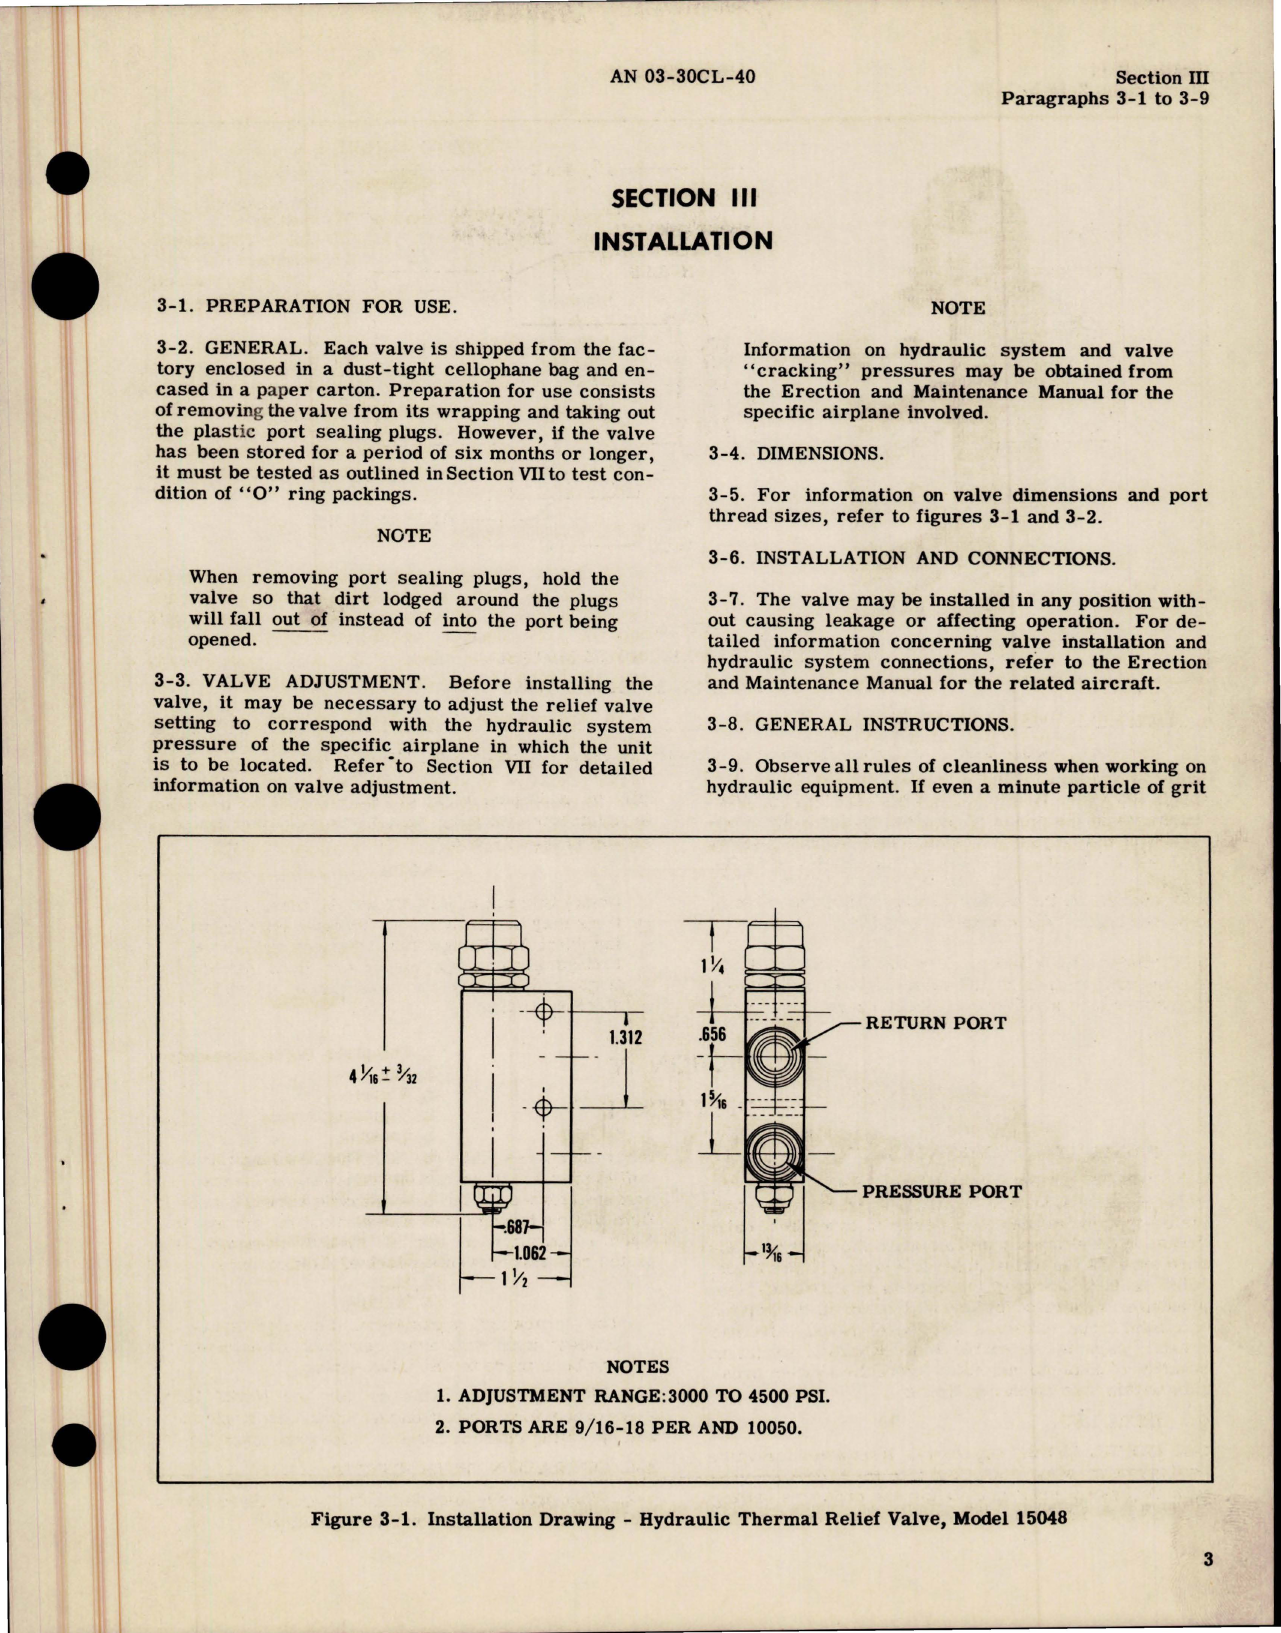 Sample page 7 from AirCorps Library document: Operation, Service, Overhaul Instructions with Parts Catalog for Hydraulic Thermal Relief Valve - 15048, and Hydraulic Pressure Relief Valve 14754